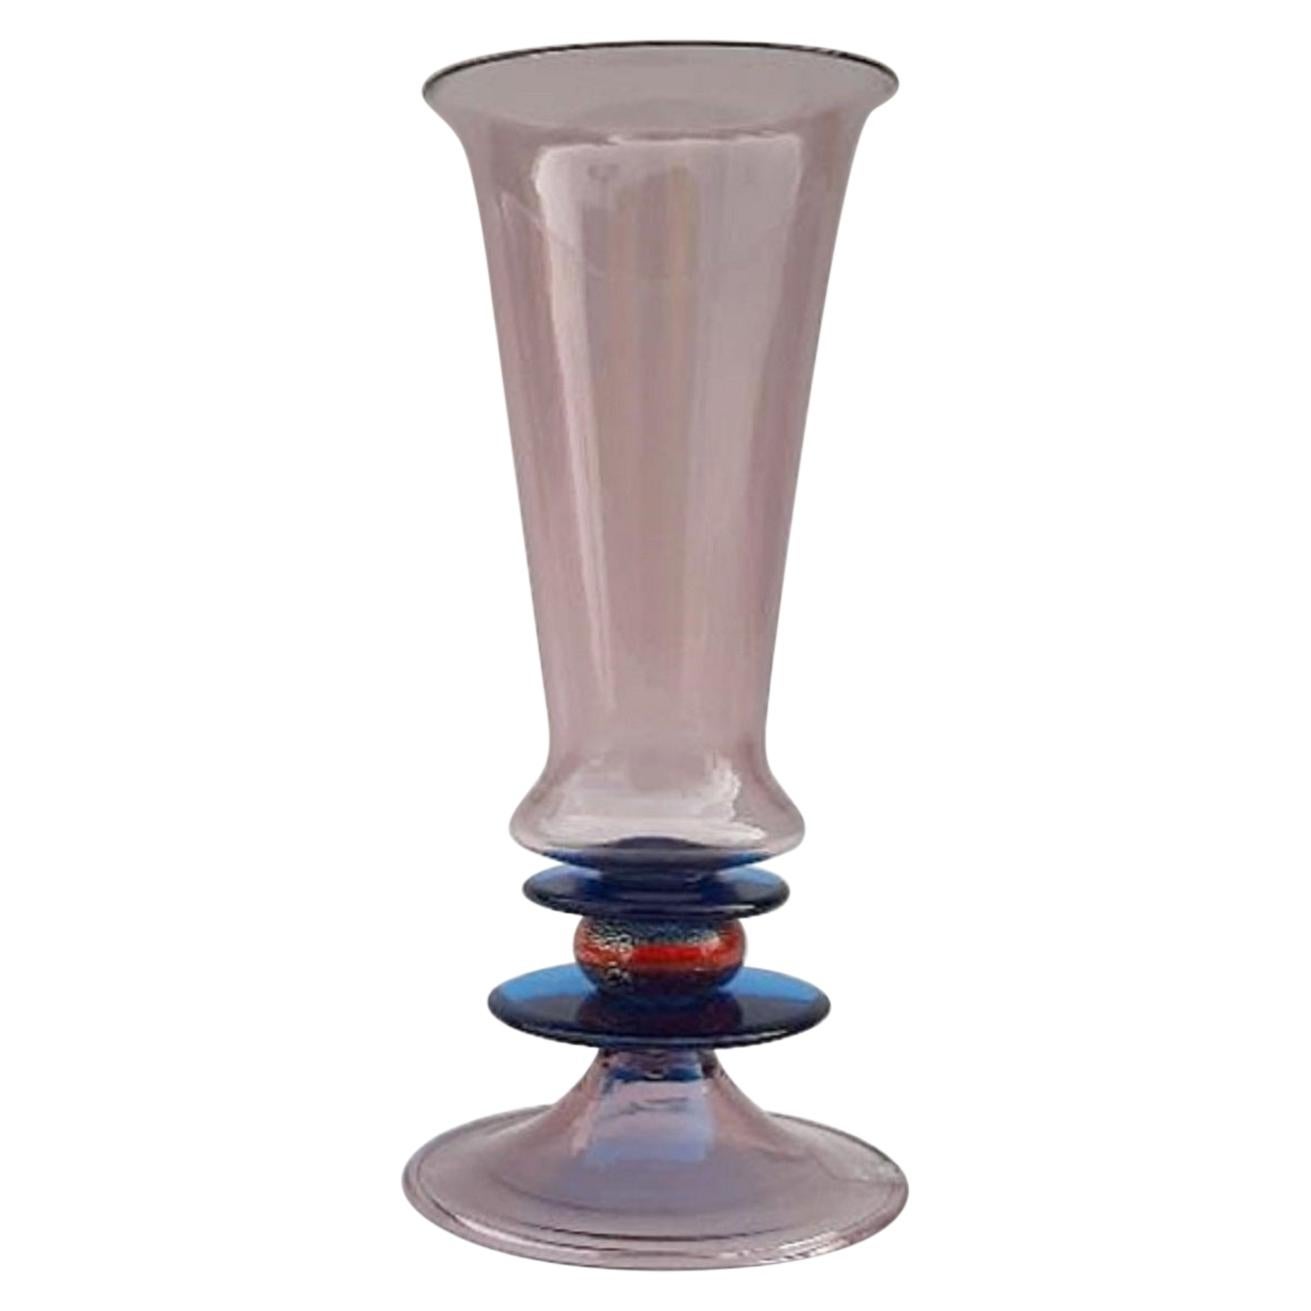 Postmodern " Memphis" Vase produced by Formia, 1989 For Sale